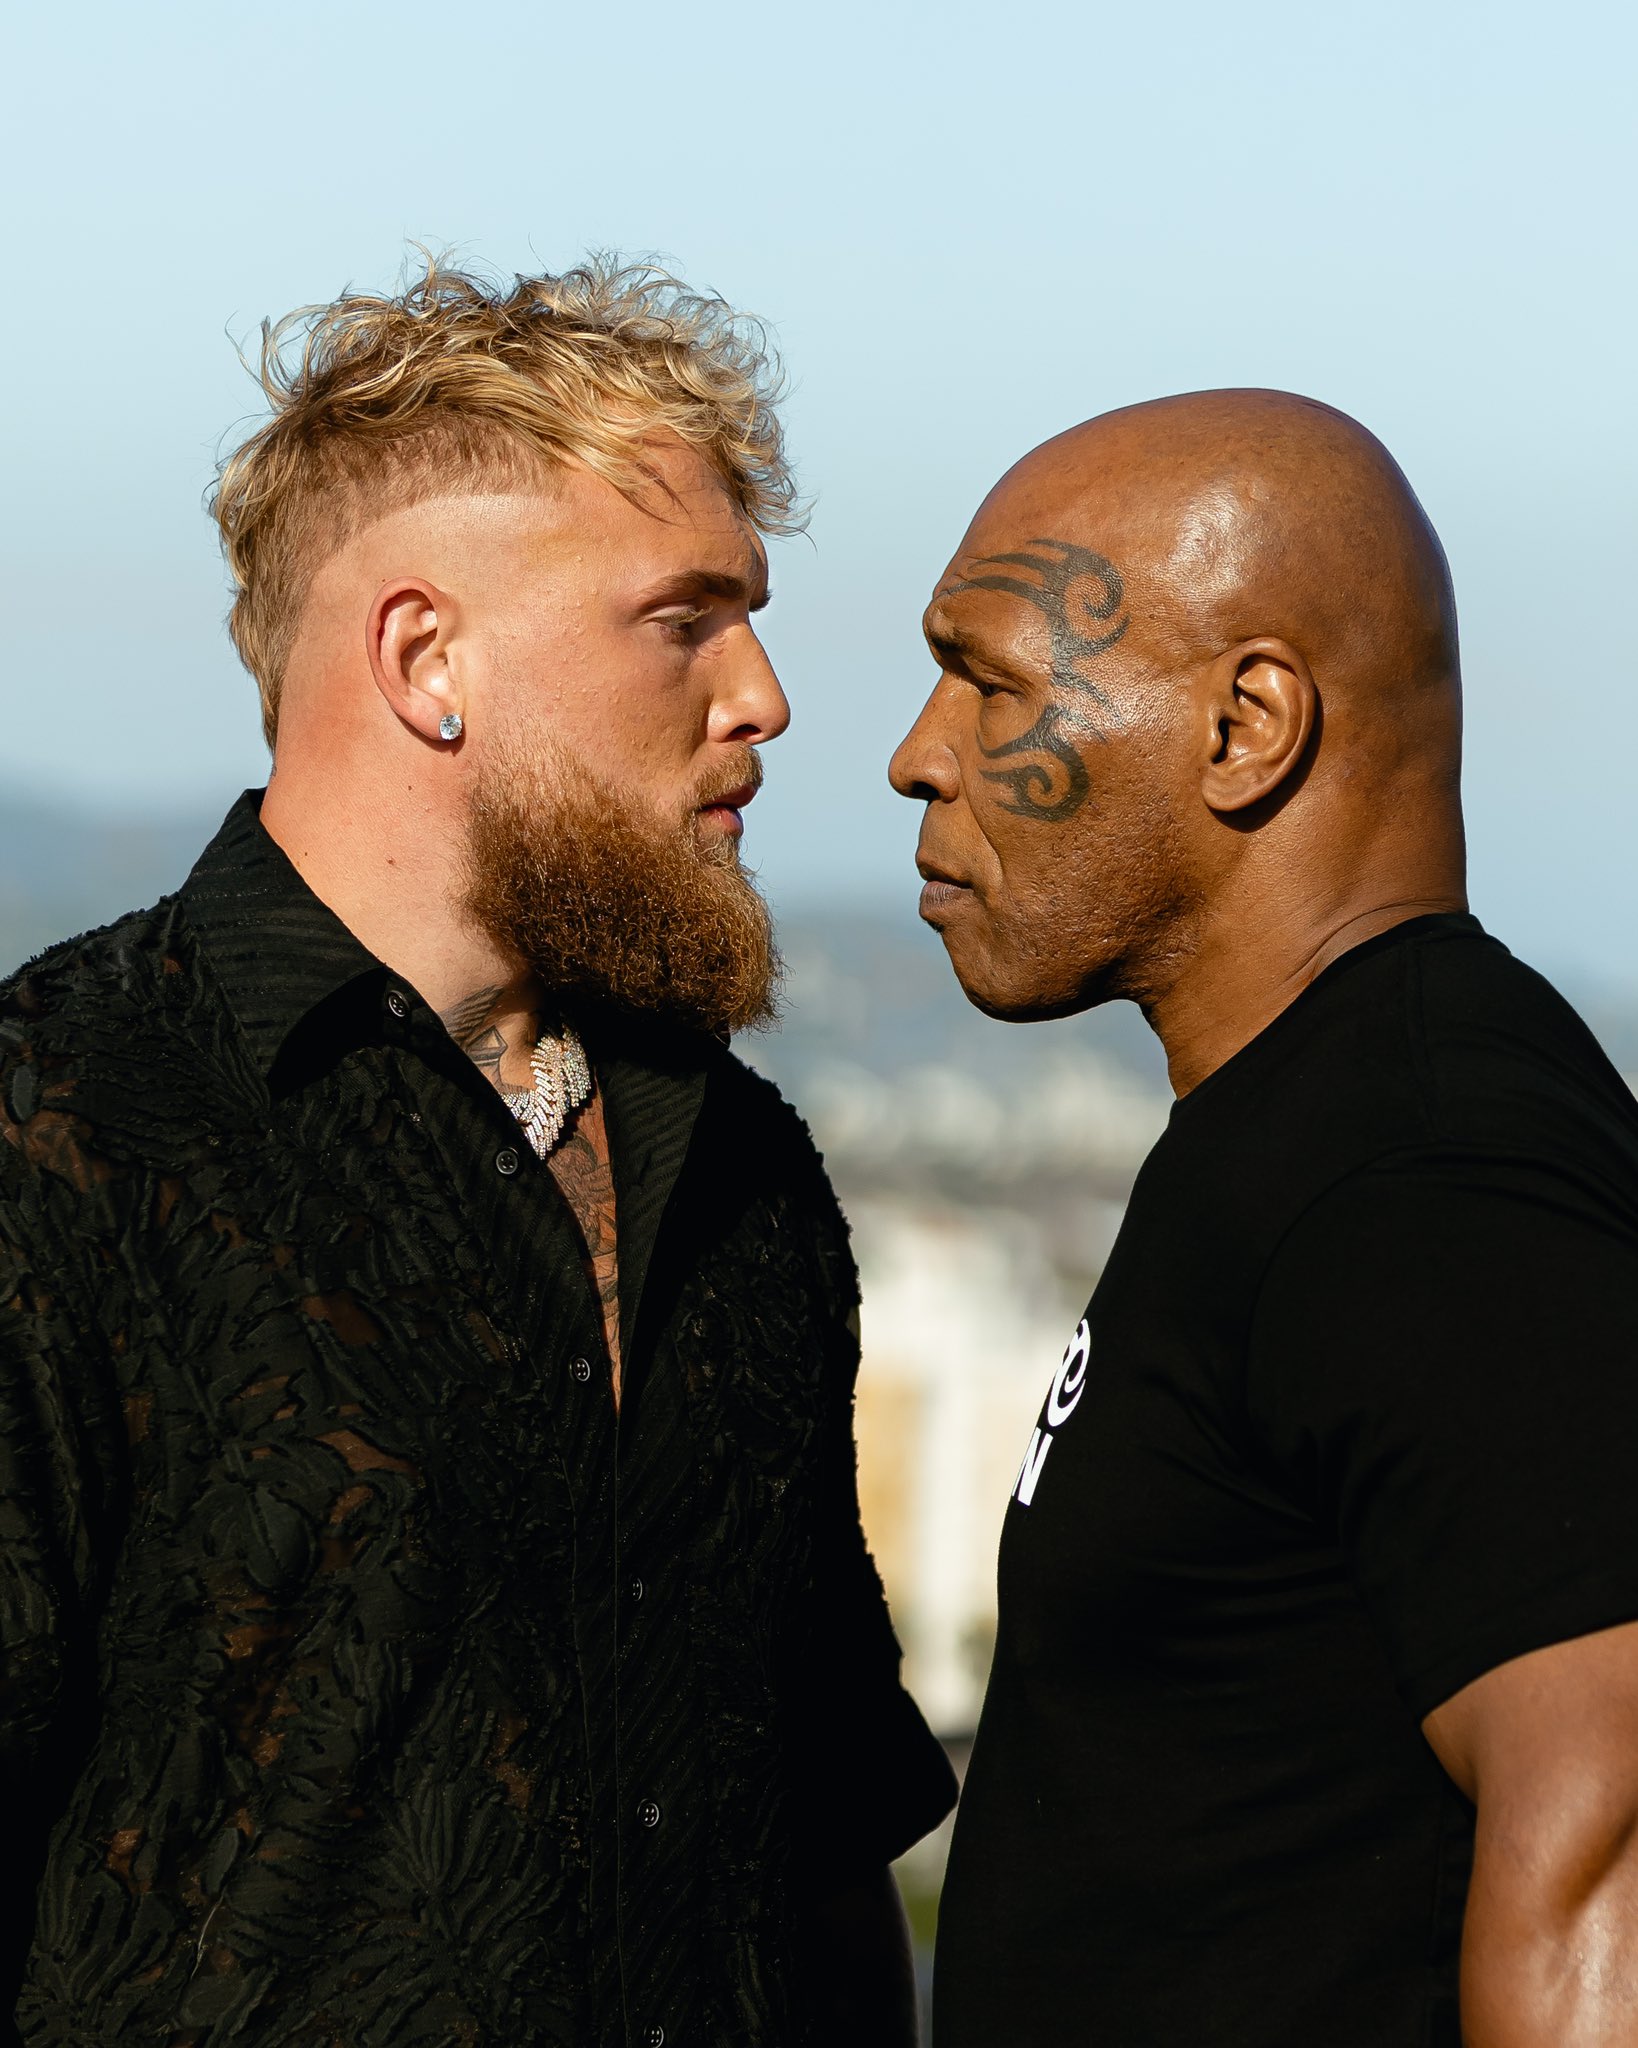 Jake Paul facing off with Mike Tyson